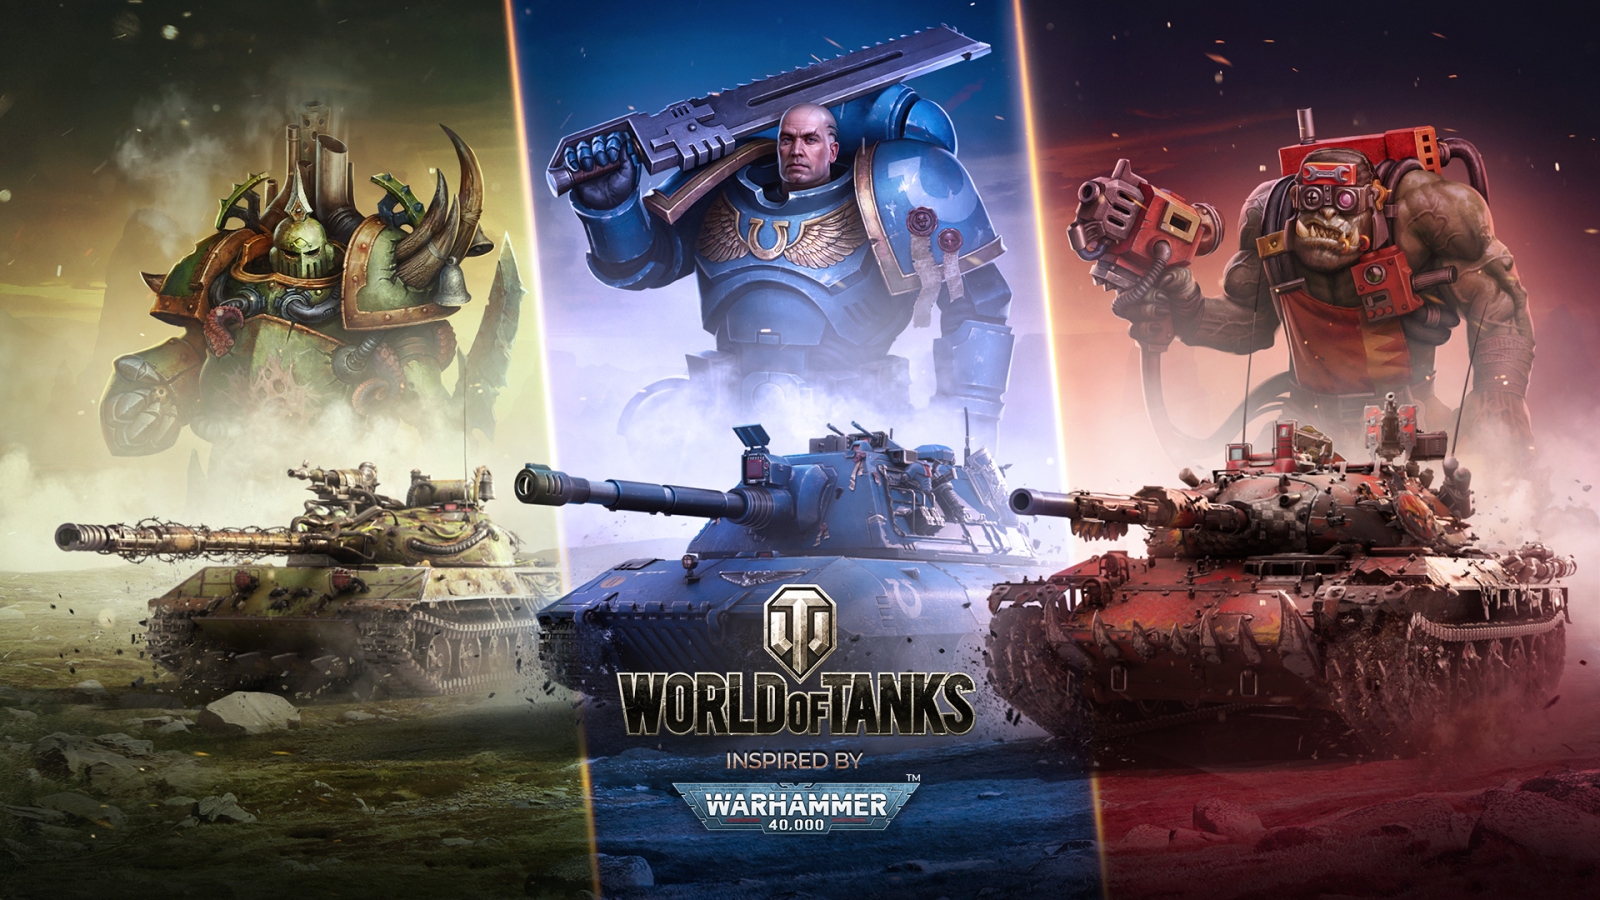 combate Profesor Adoración Warhammer 40,000 and World of Tanks come together in Battle Pass Season VIII